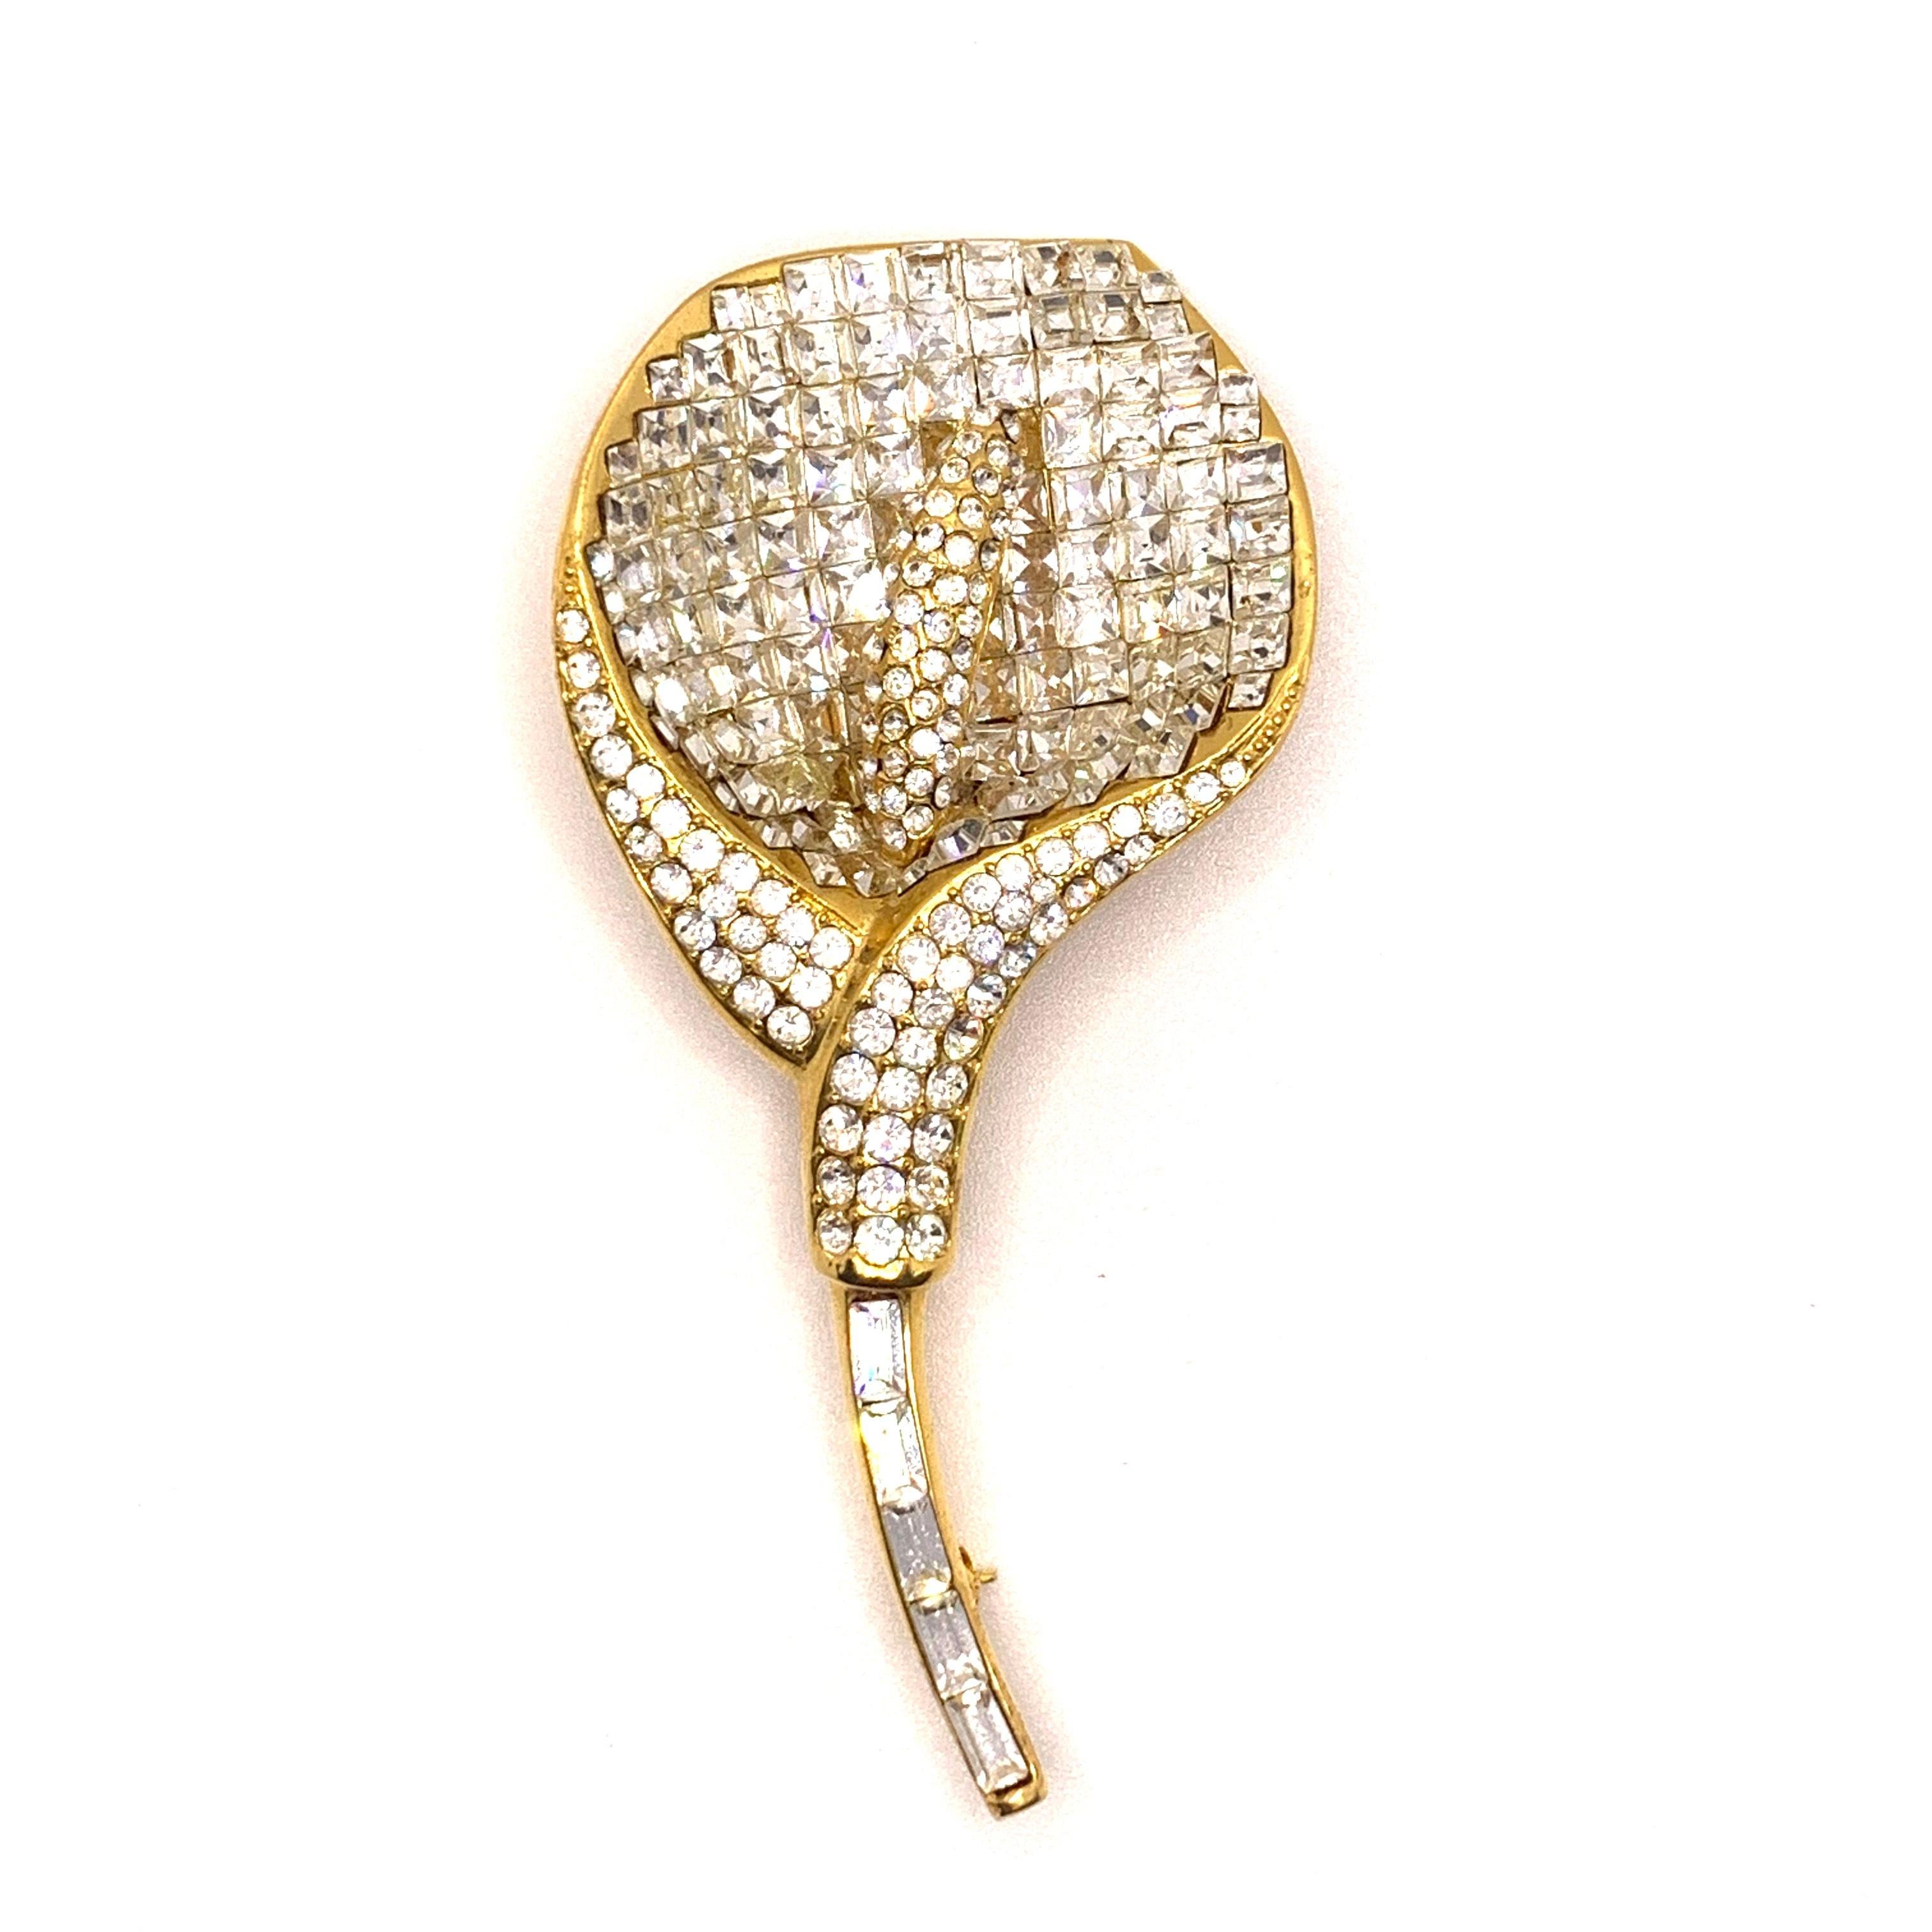 Classic Elegant Vintage Swarovski Clear Crystal Calla Lily Brooch

This vintage brooch features over 240 pieces of white Swarovski crystals in yellow gold tone. Made in the USA by New York designer brand Jarin.  3